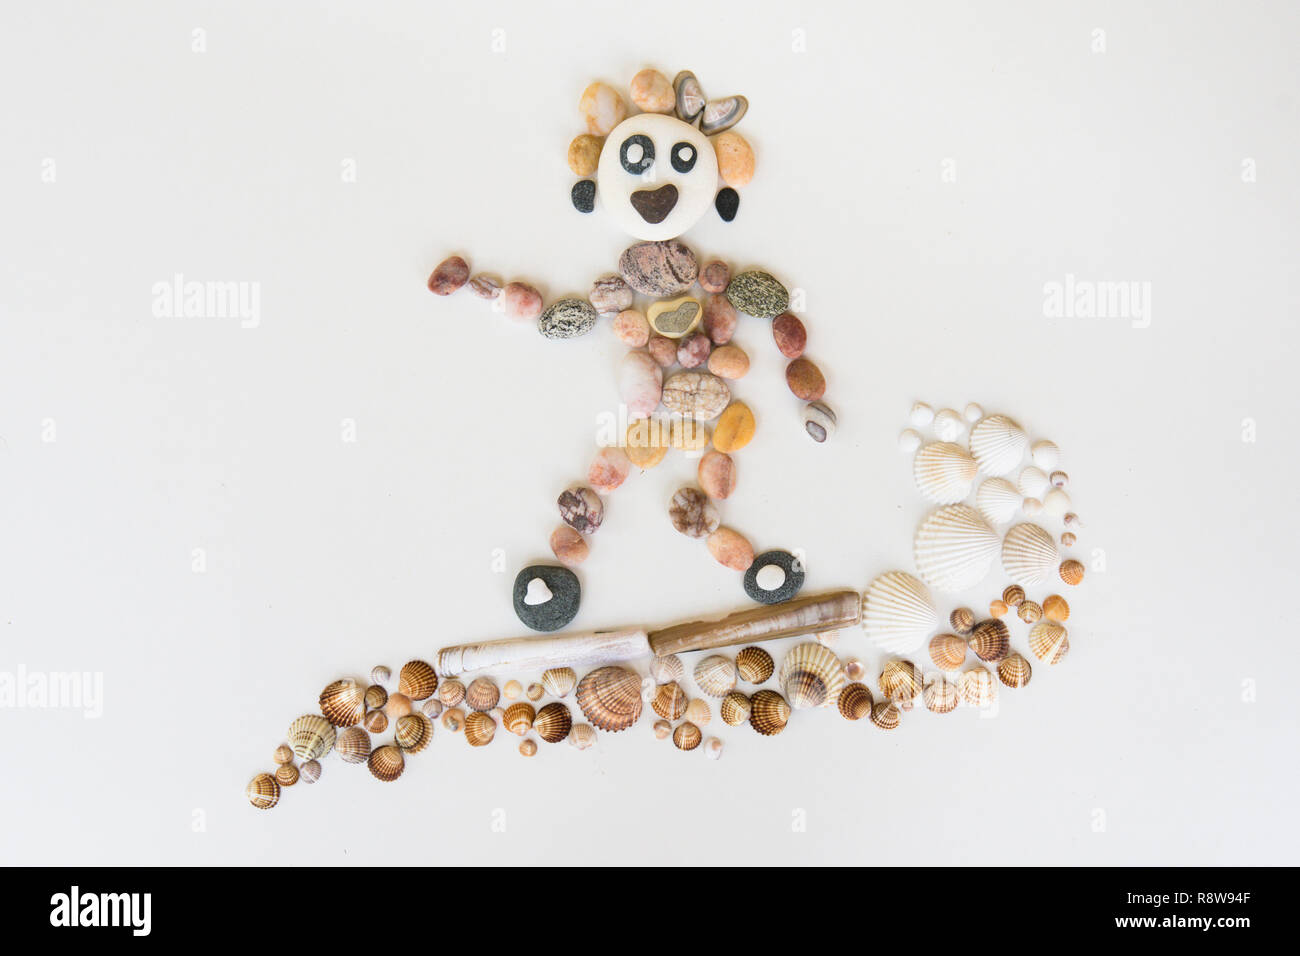 natural art, craft, picture of person surfing, made from pebbles, shells, Stock Photo